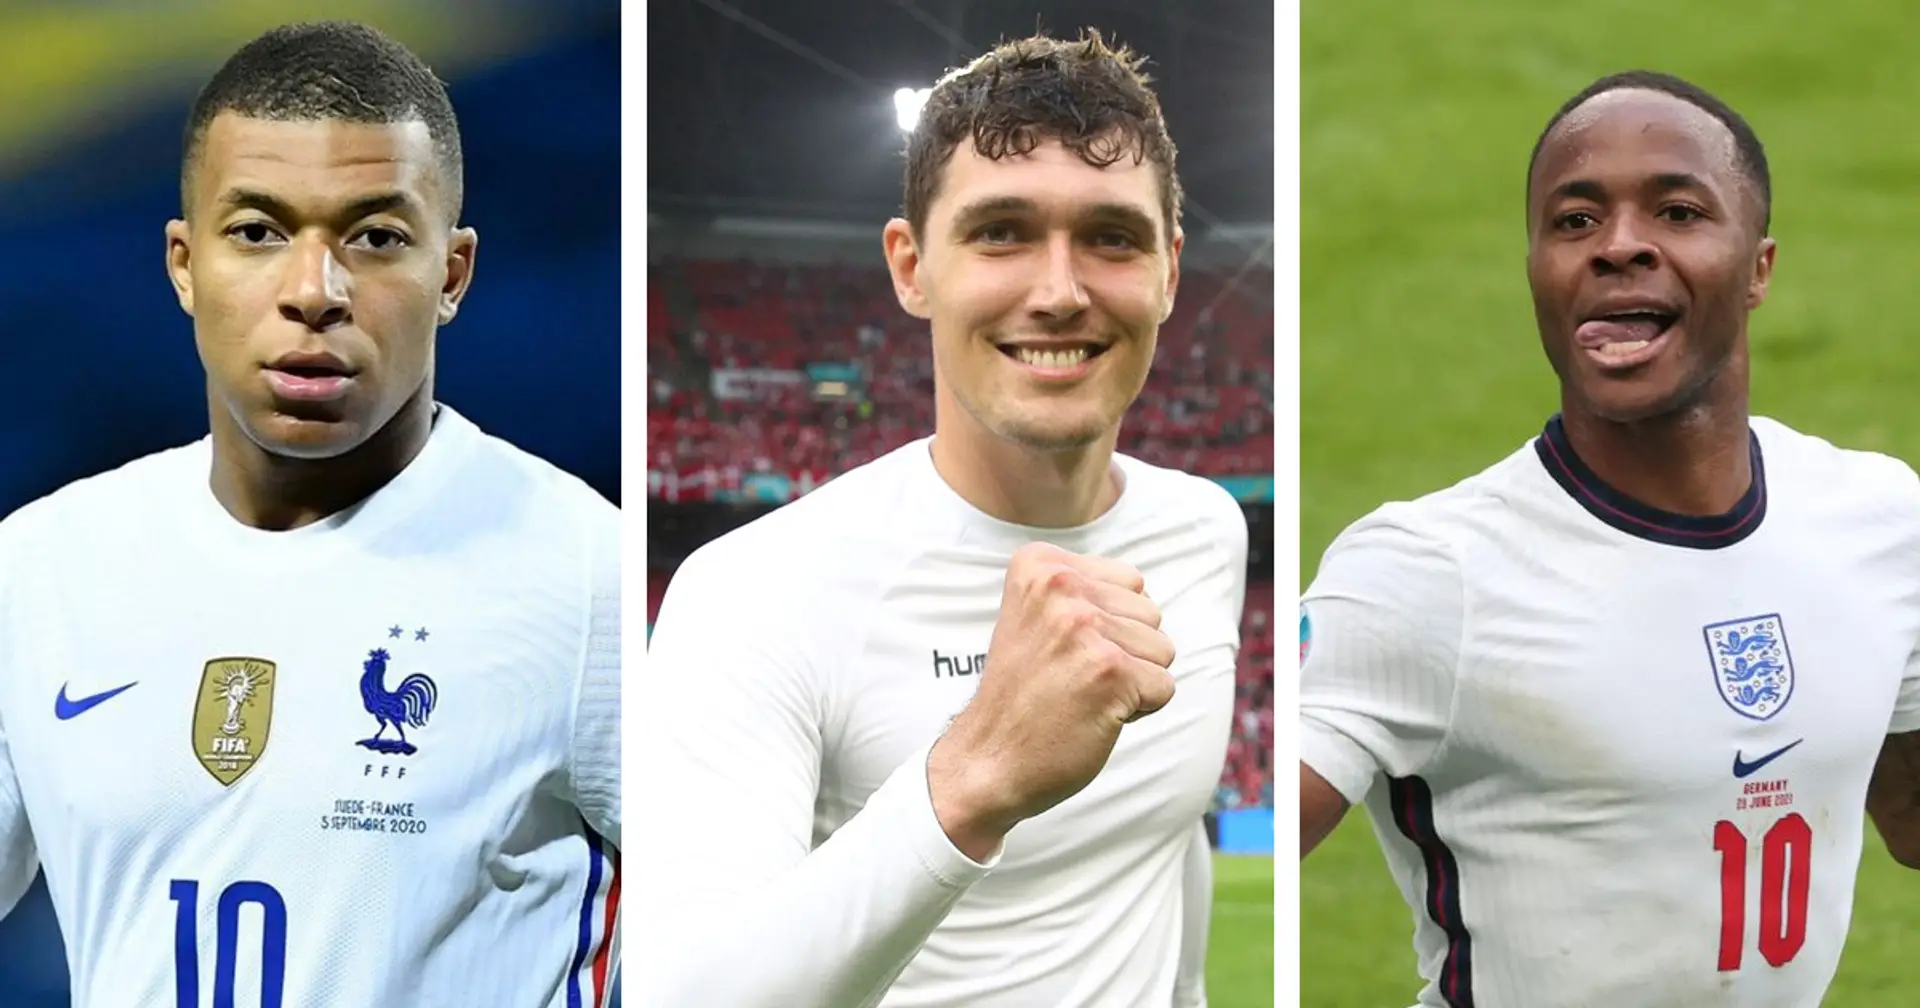 Faster than Sterling and Mbappe: Christensen ranked among quickest players at Euros